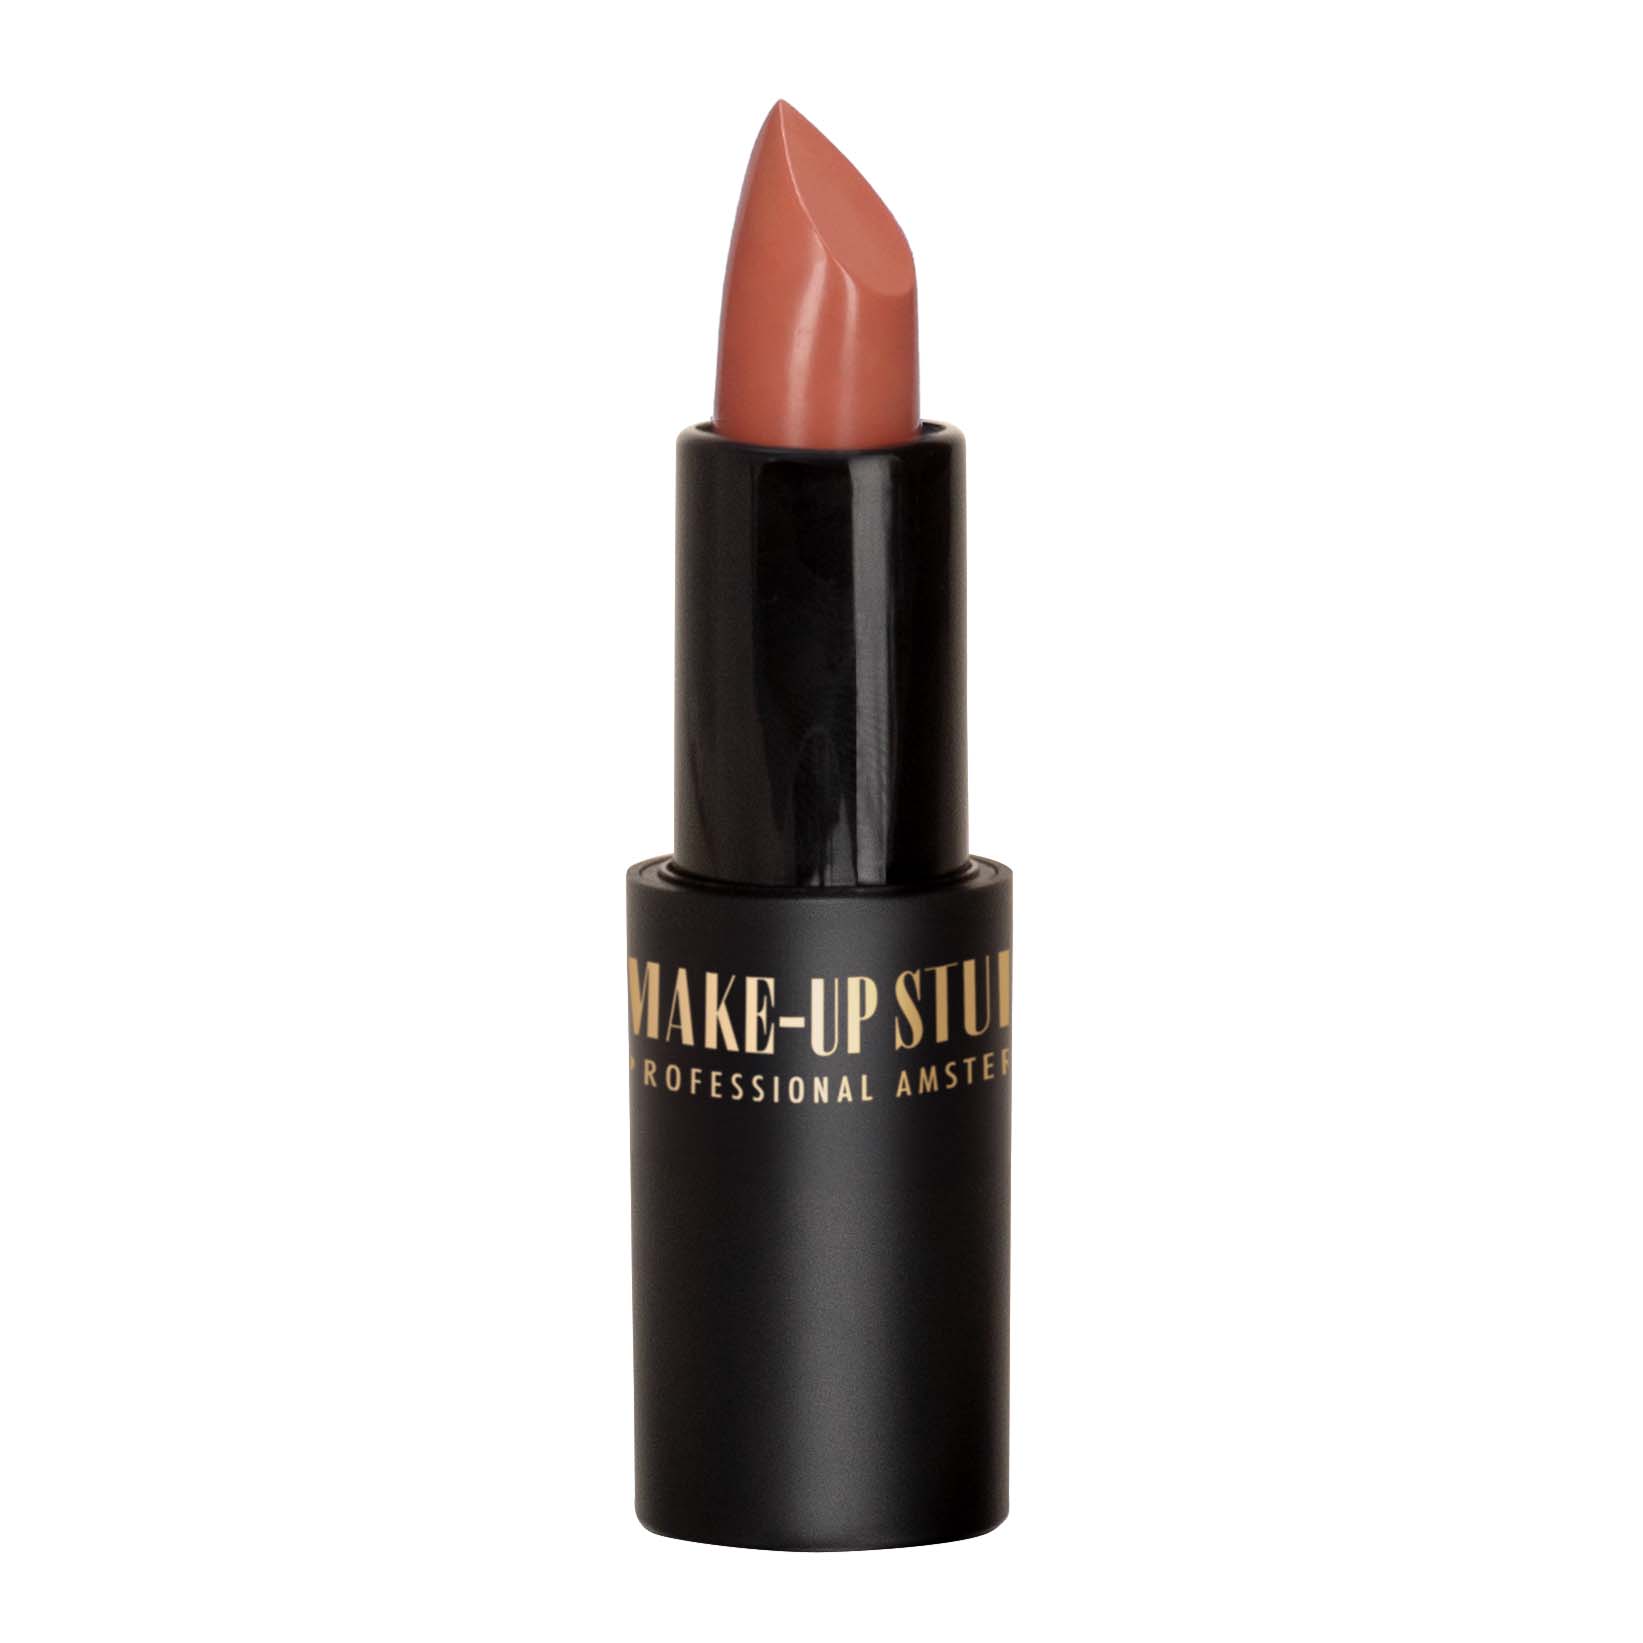 Shop all lip products Studio from Make-up Studio | online! Make-up Amsterdam